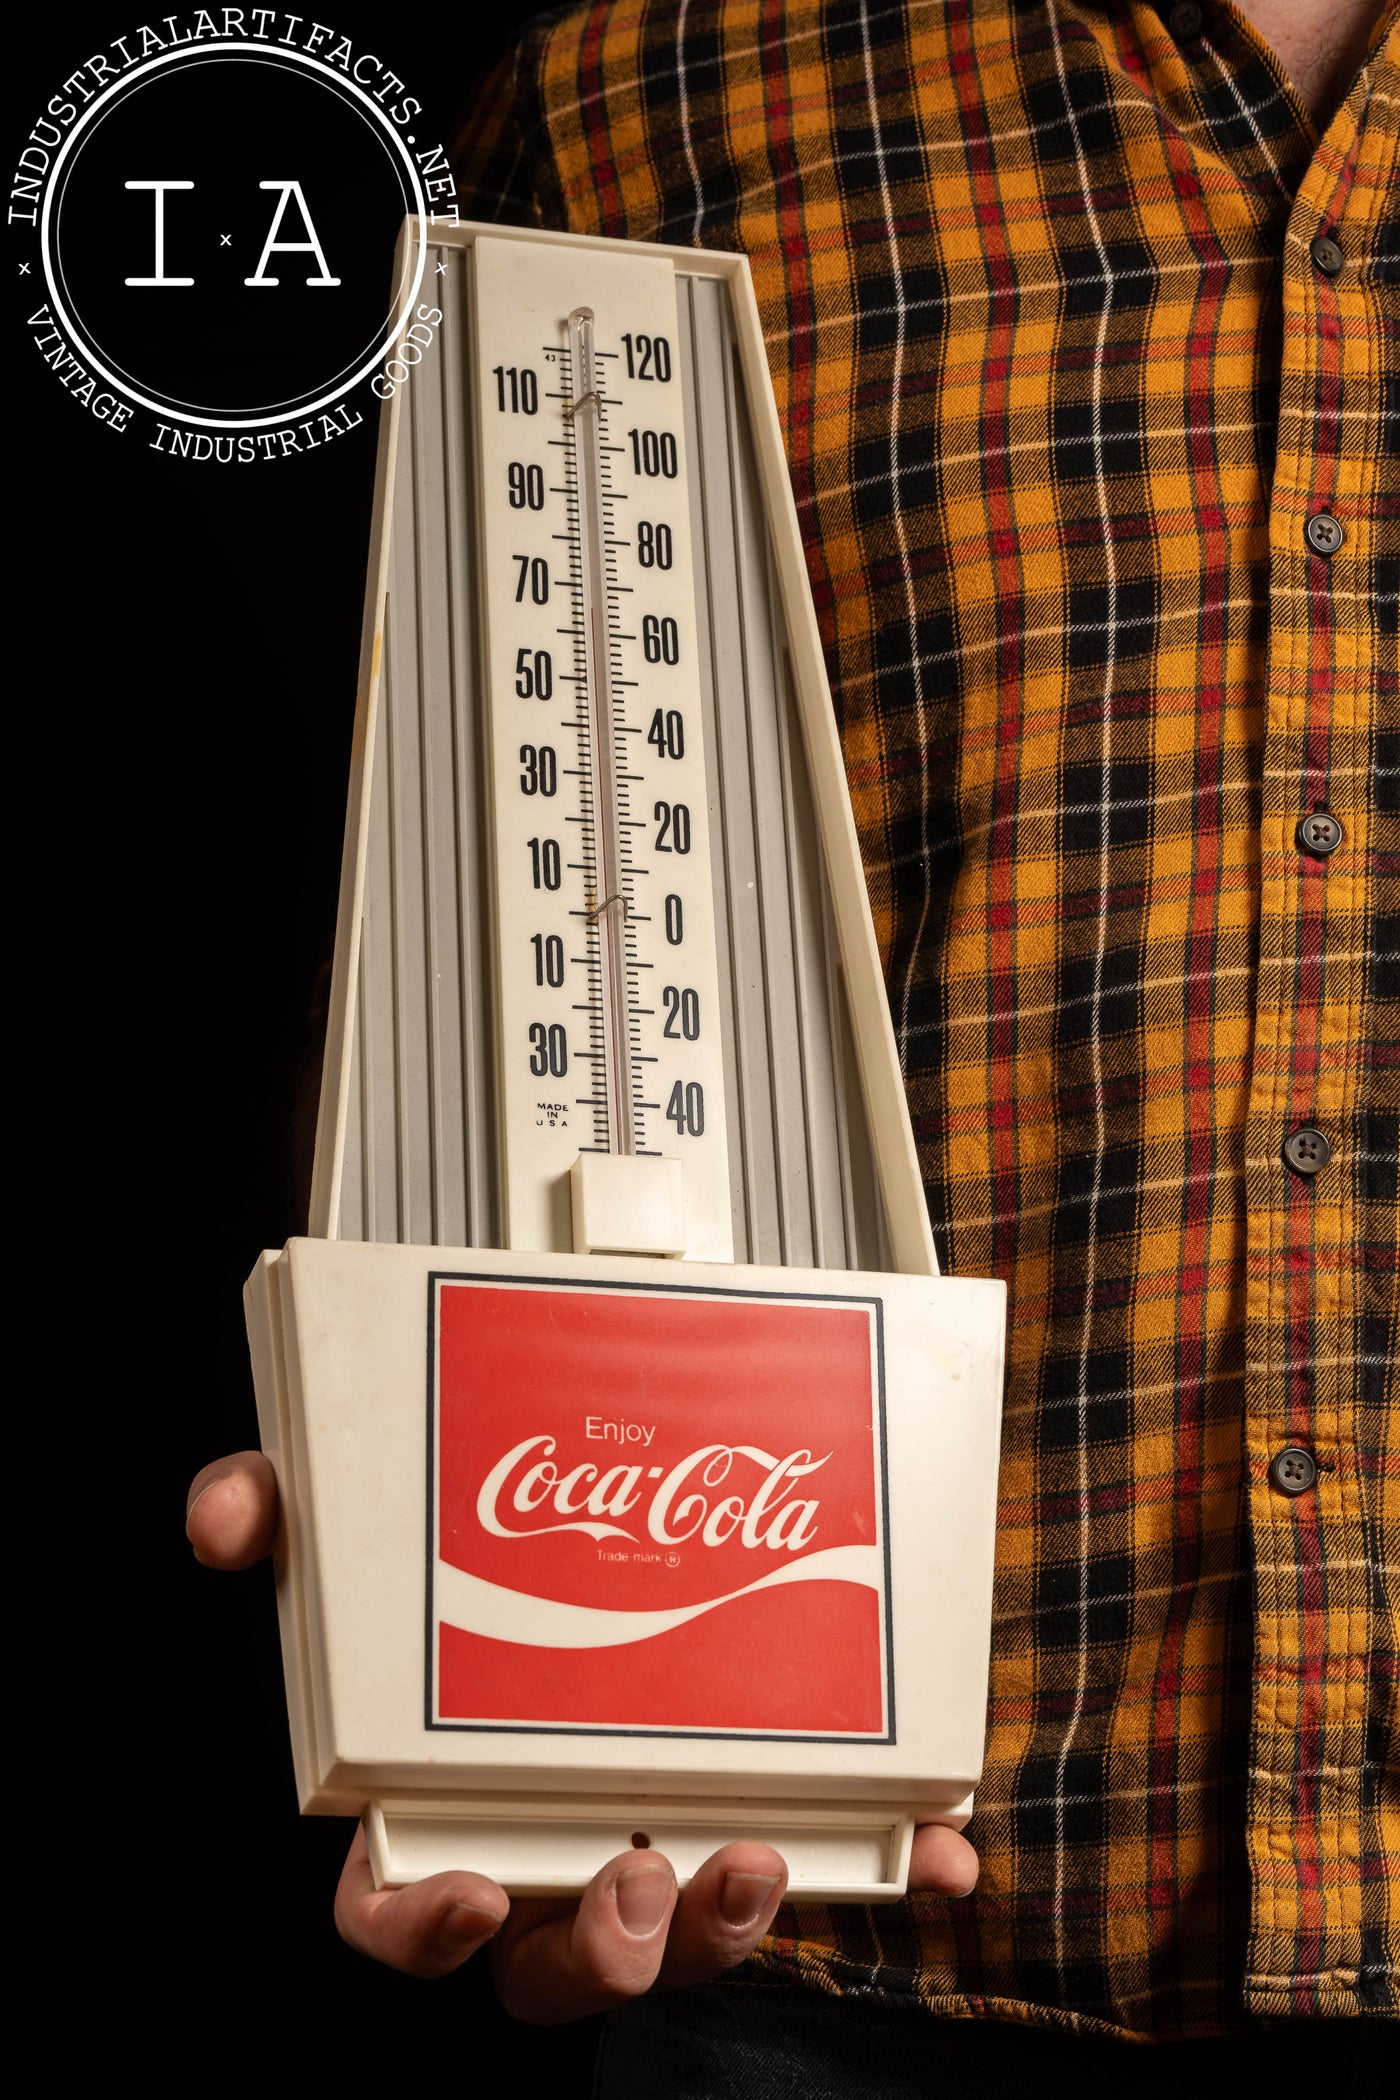 Vintage Coca-Cola and Sprite Promotional Thermometers